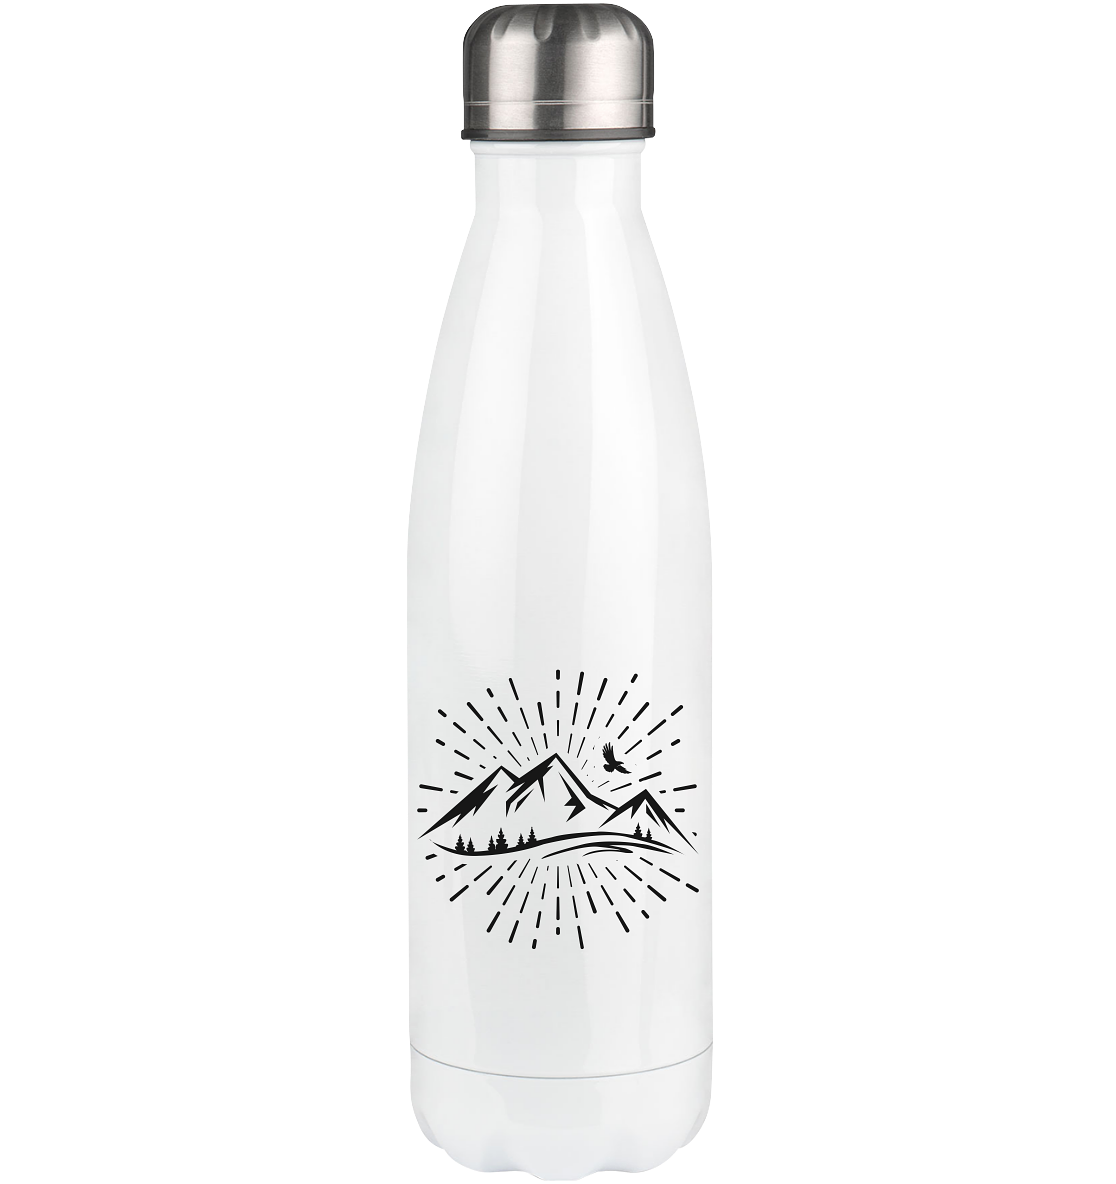 Firework and Mountain - Edelstahl Thermosflasche berge 500ml